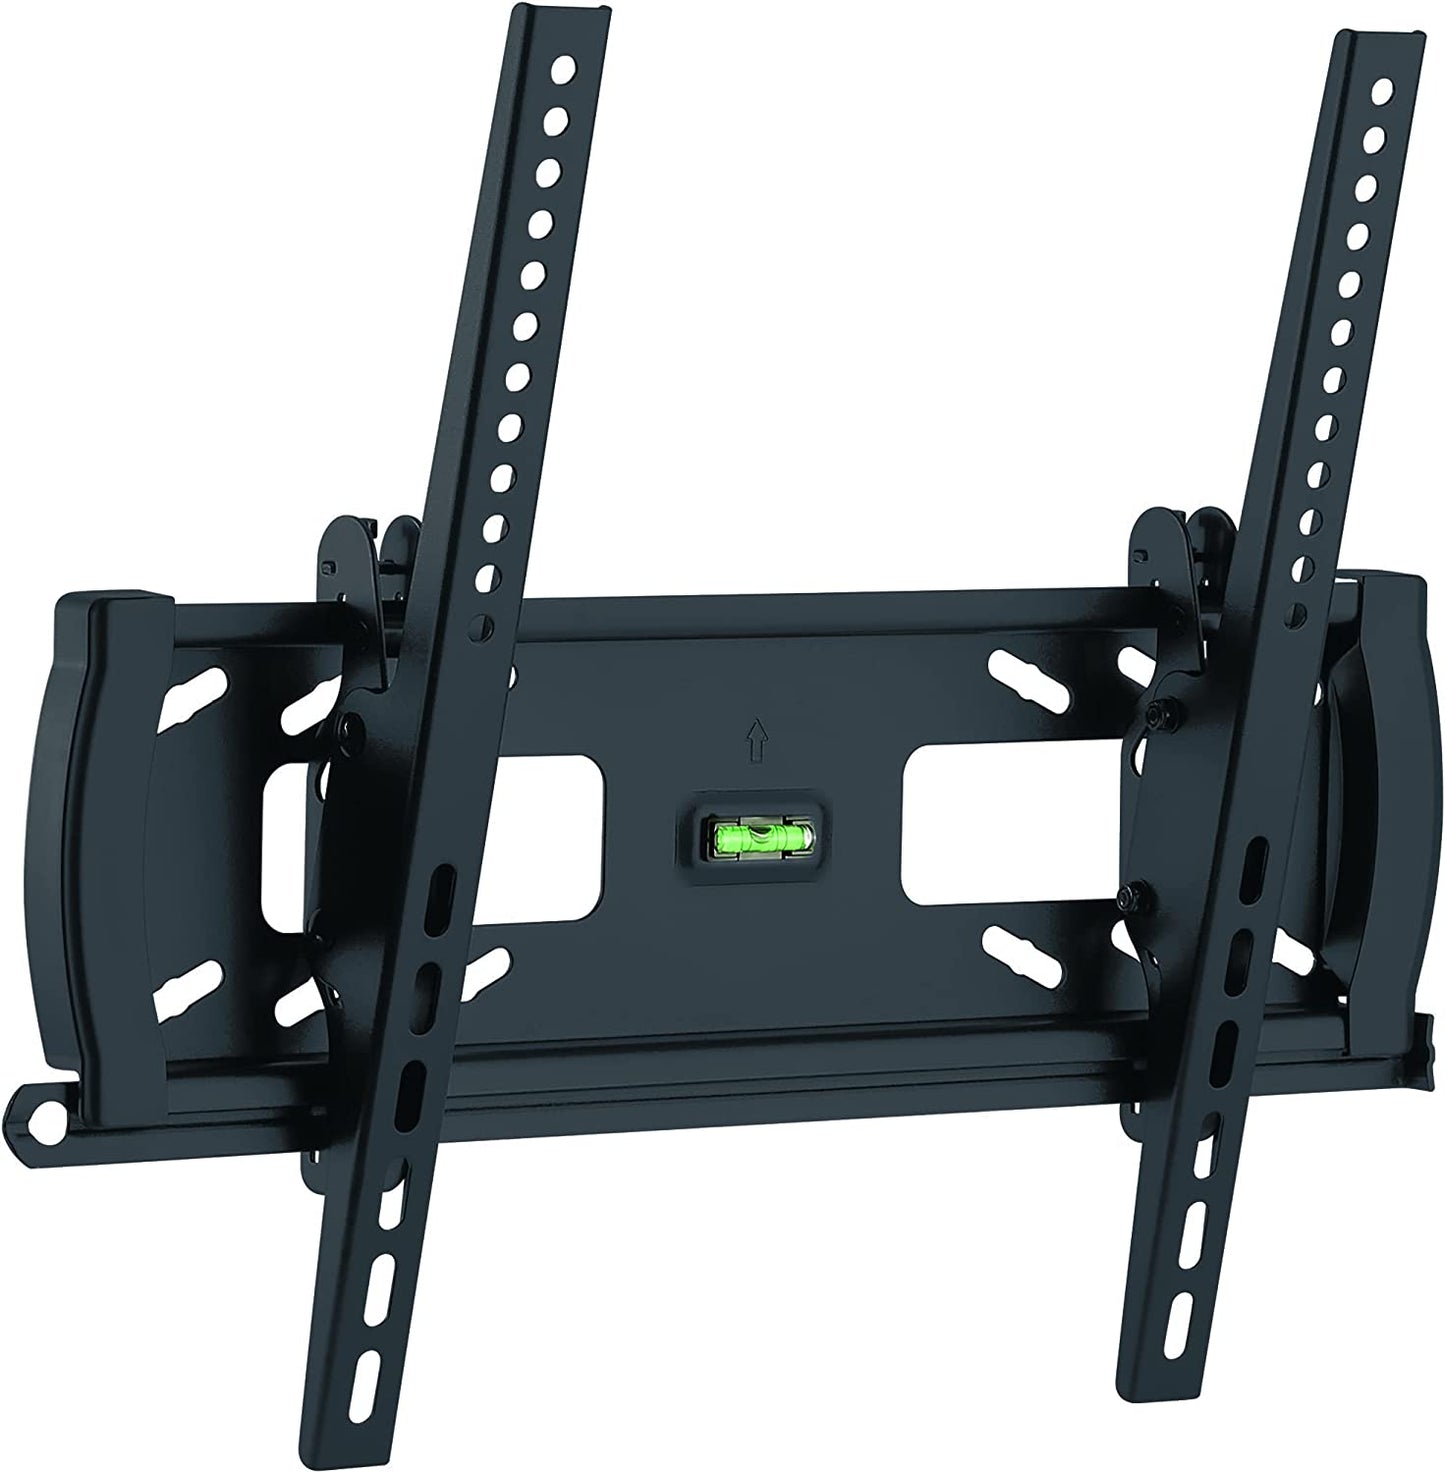 ProMounts Tilting TV Wall Mount for 32”-60” Screens, Holds up to 120lbs (AMT4401)